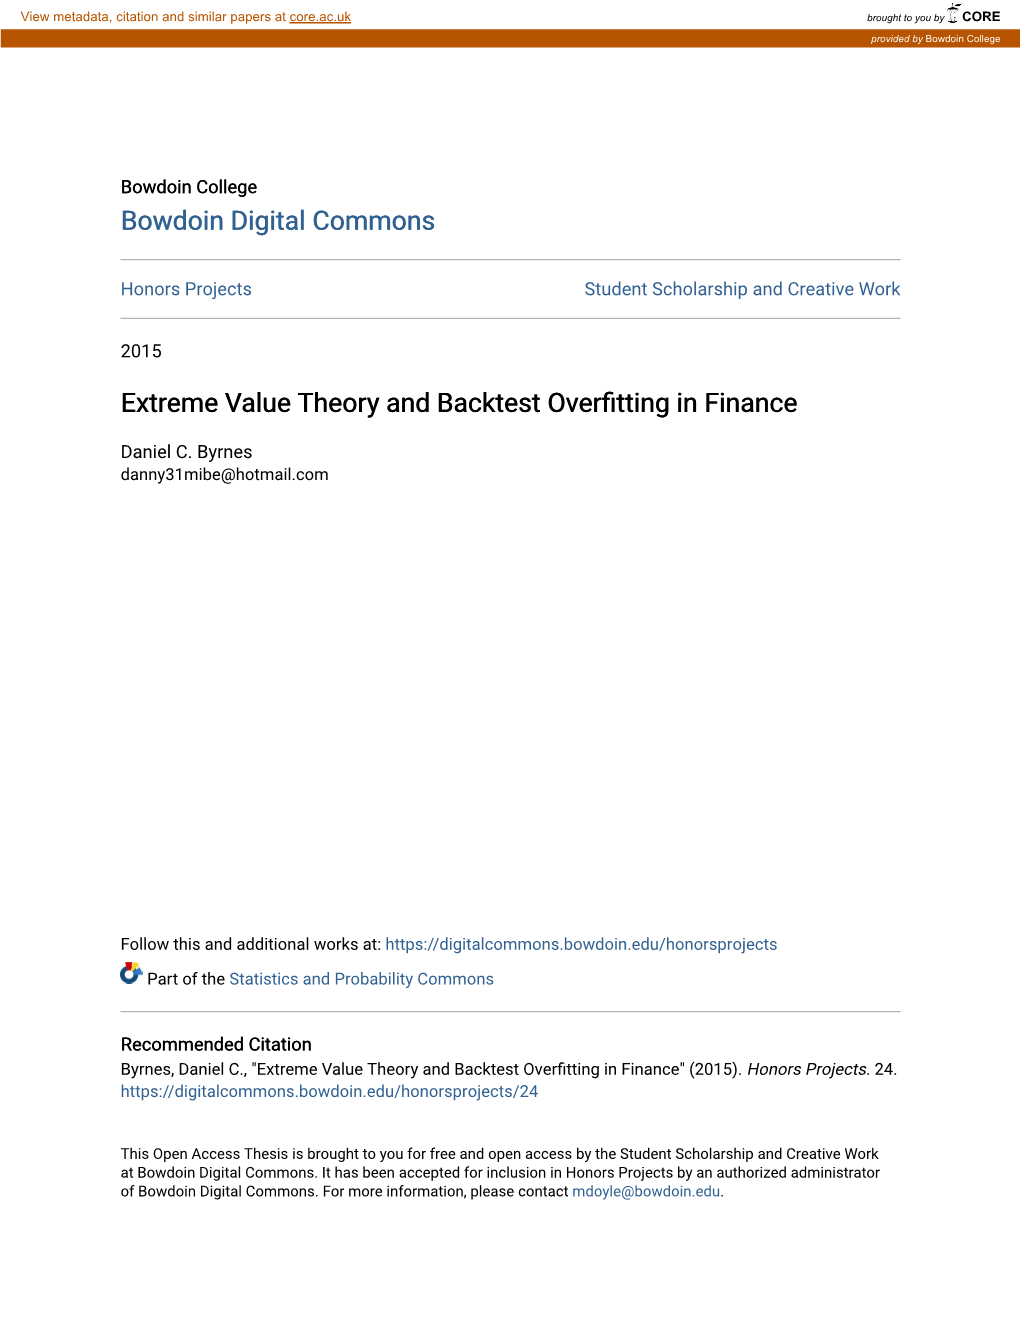 Extreme Value Theory and Backtest Overfitting in Finance